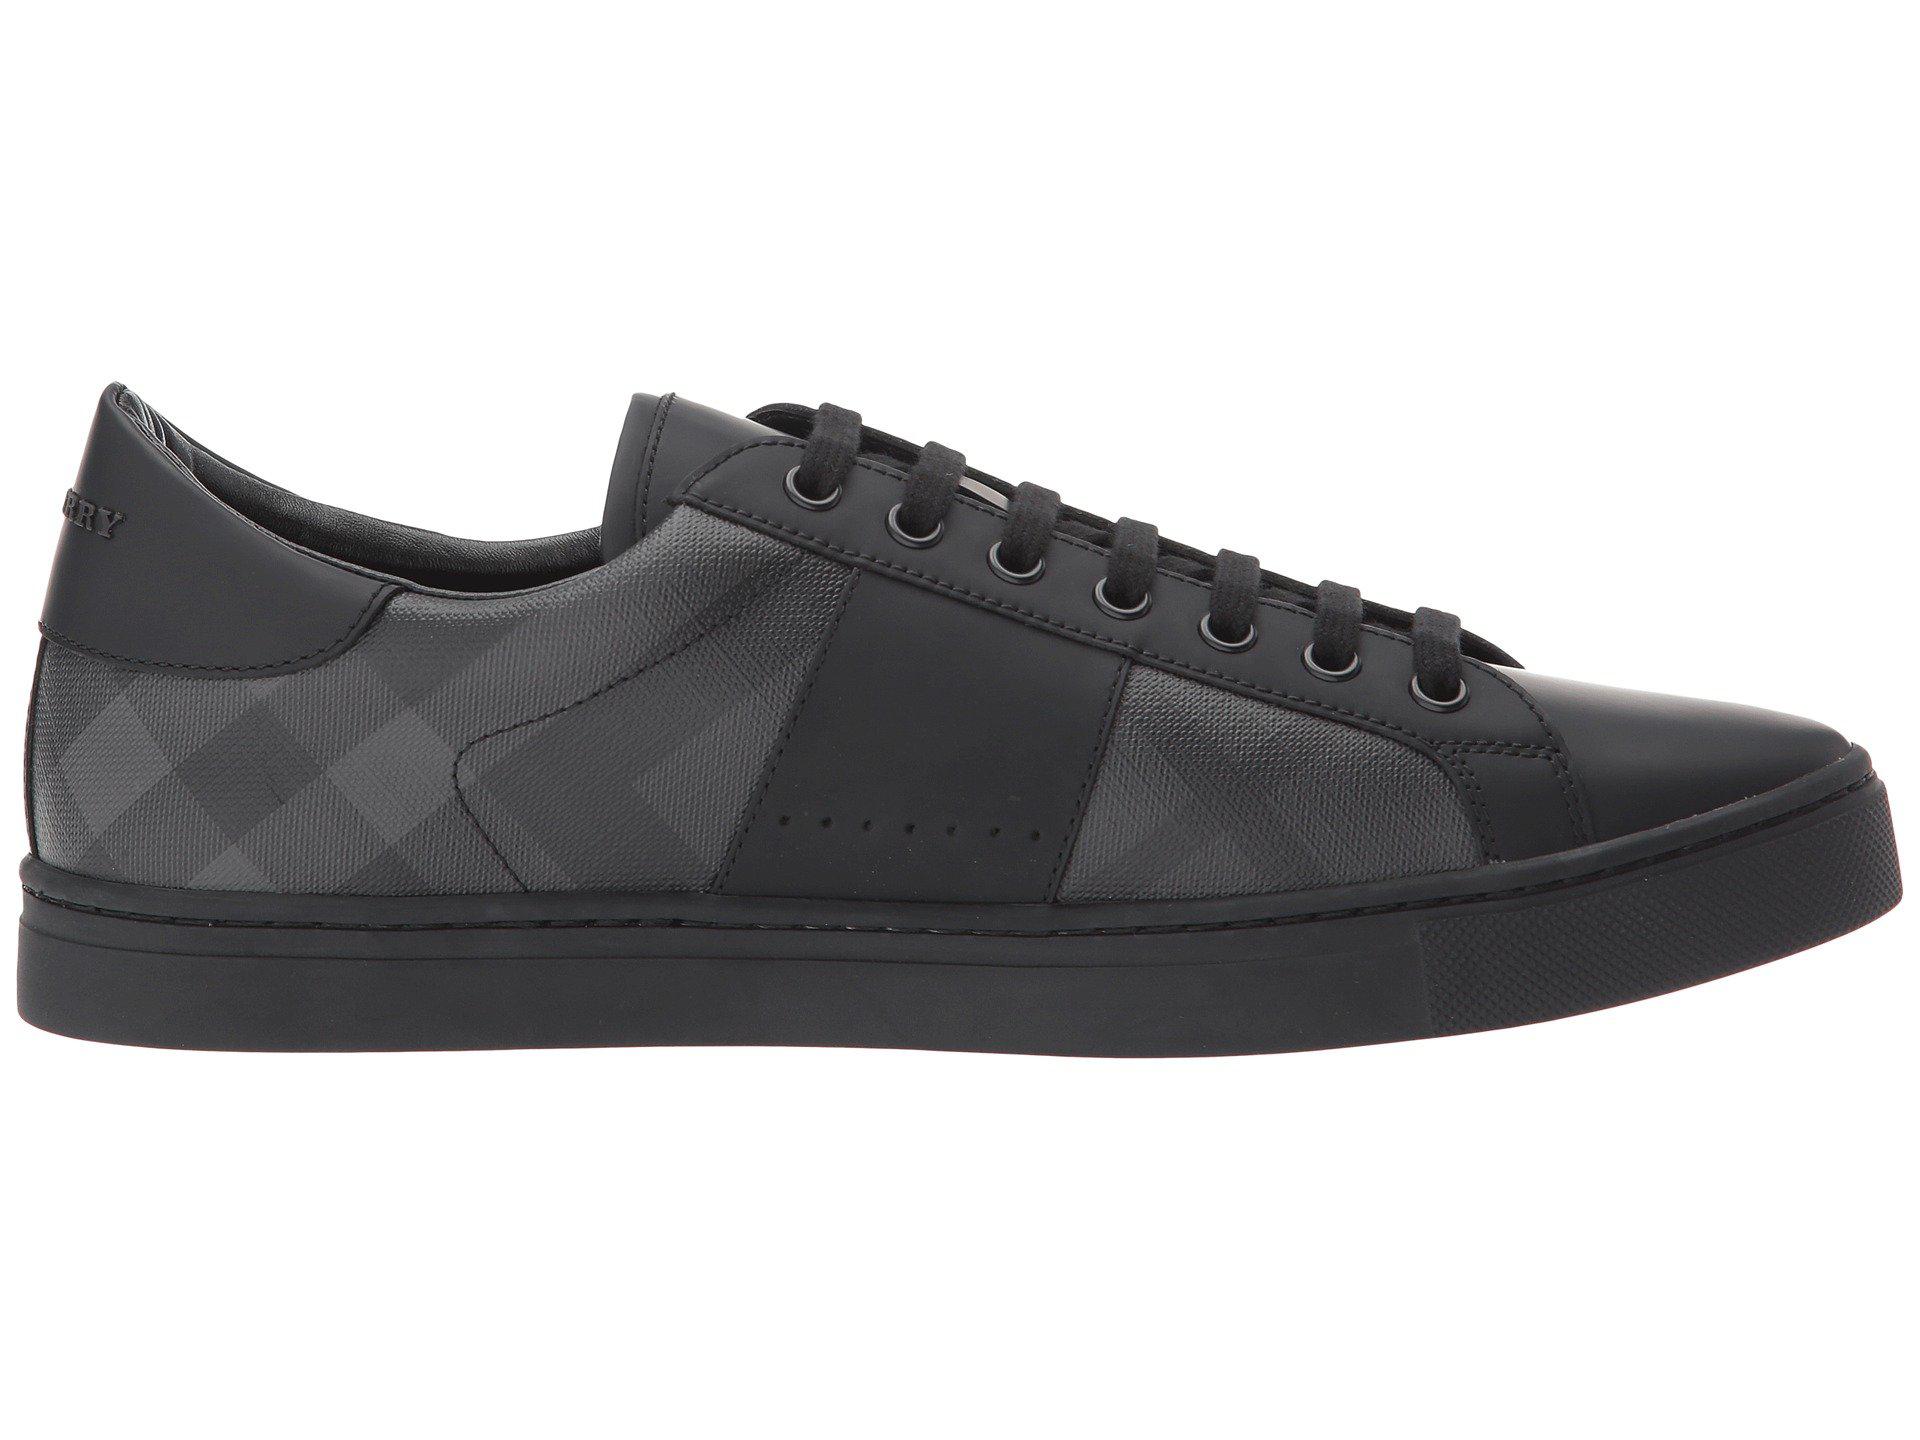 burberry ritson sneakers